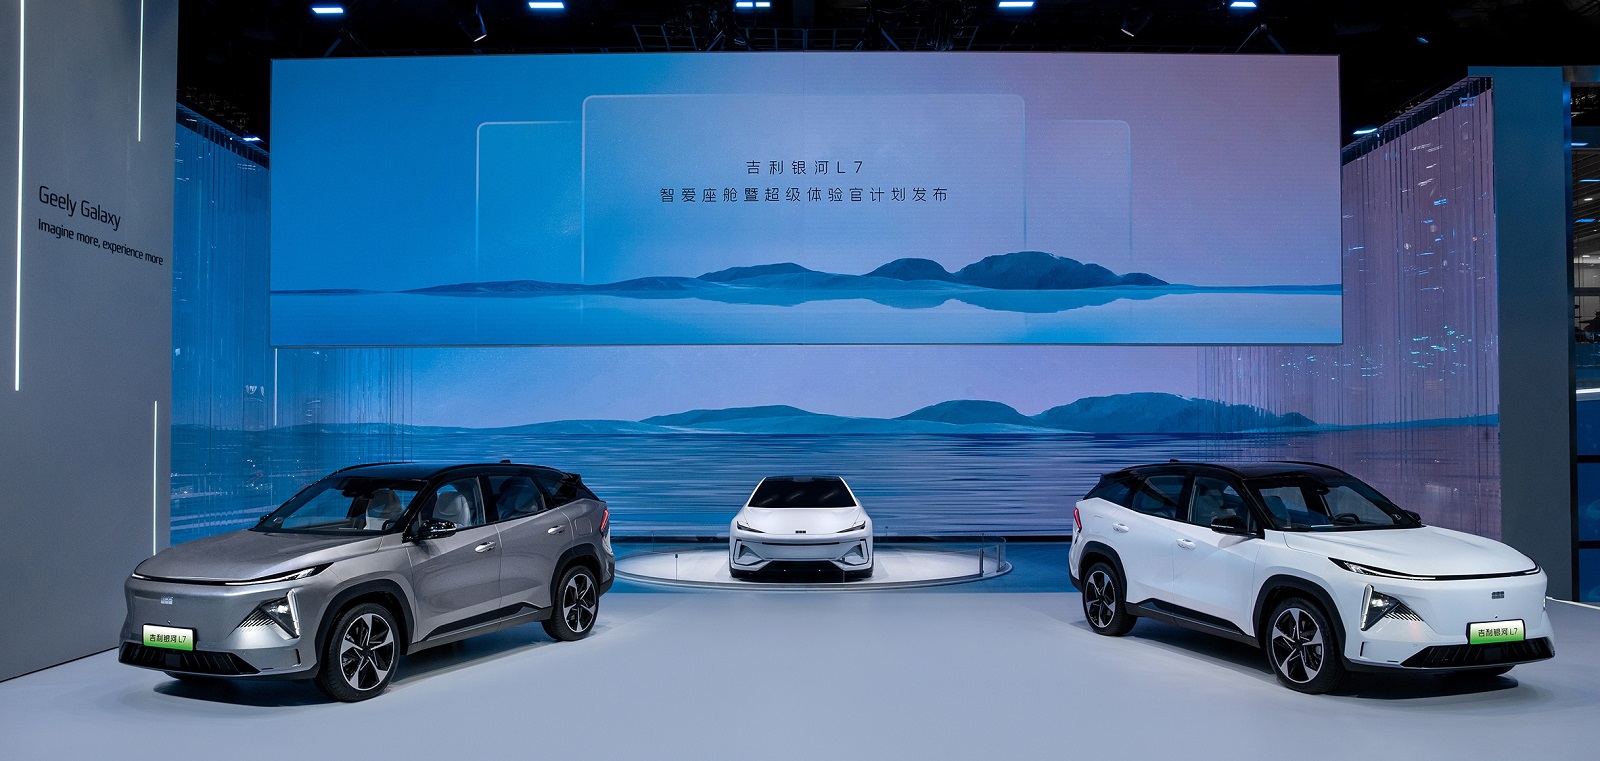 Geely-owned Zeekr brand sets its sights on North America